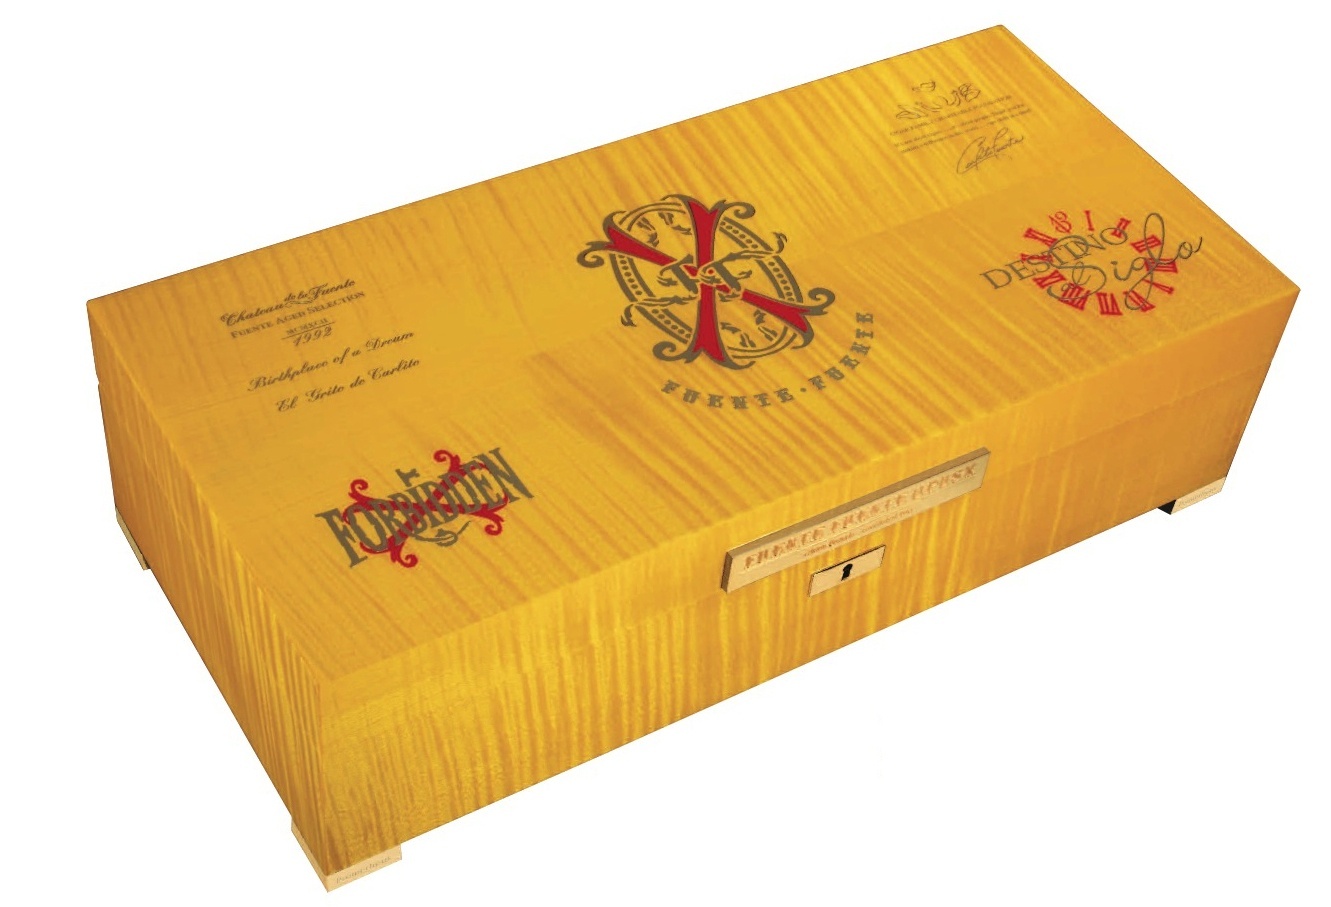 2014 Limited Edition Fuente Fuente Forbidden X Humidors by Prometheus